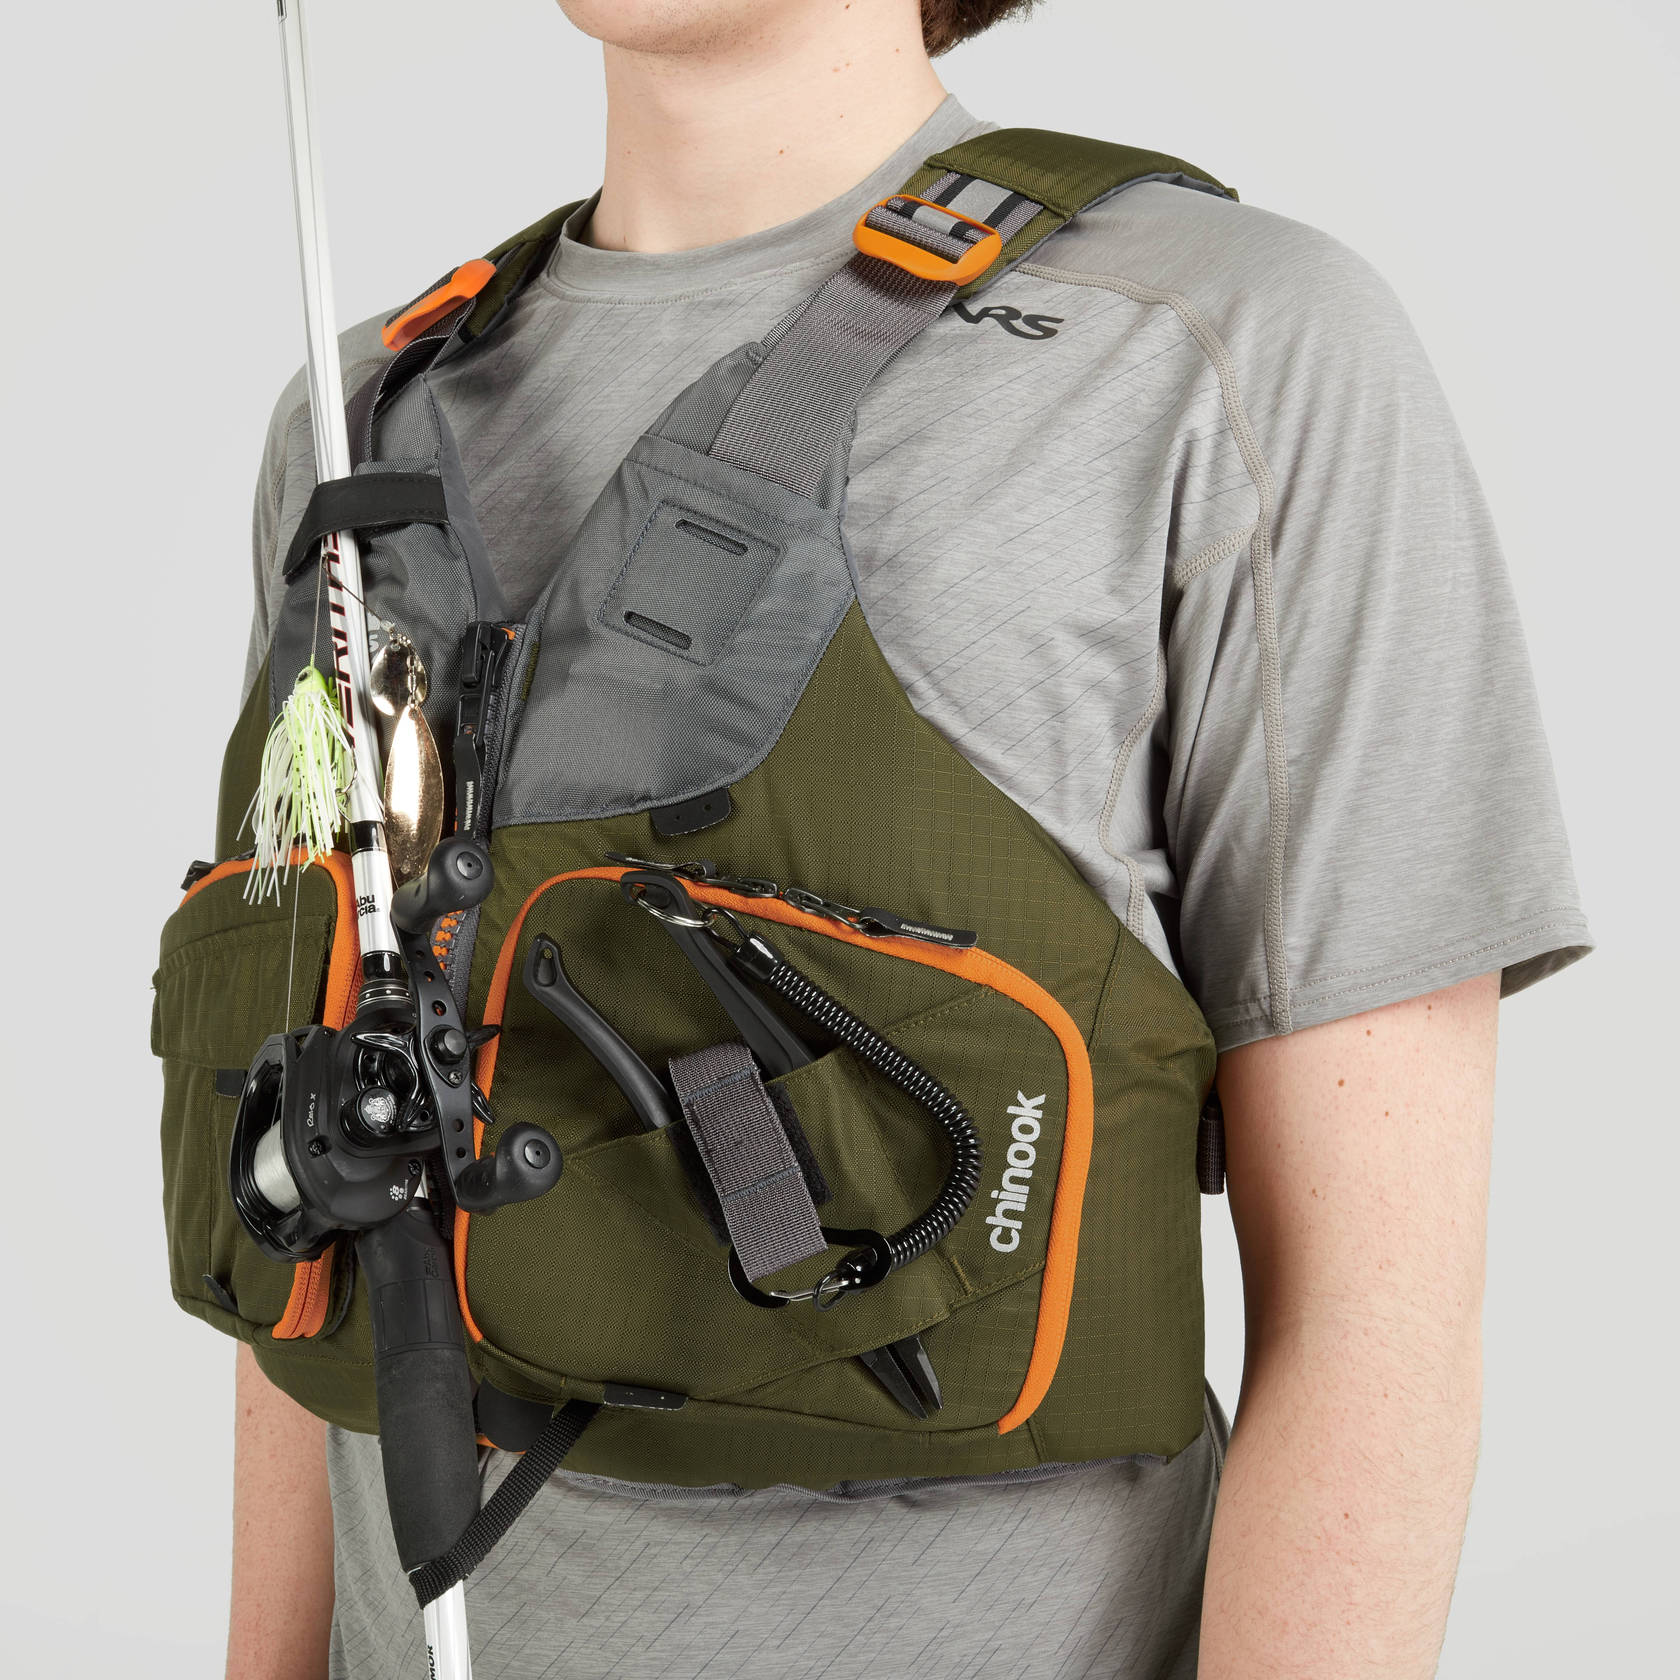 NRS Chinook Fishing Lifejacket - Top Choice for Anglers